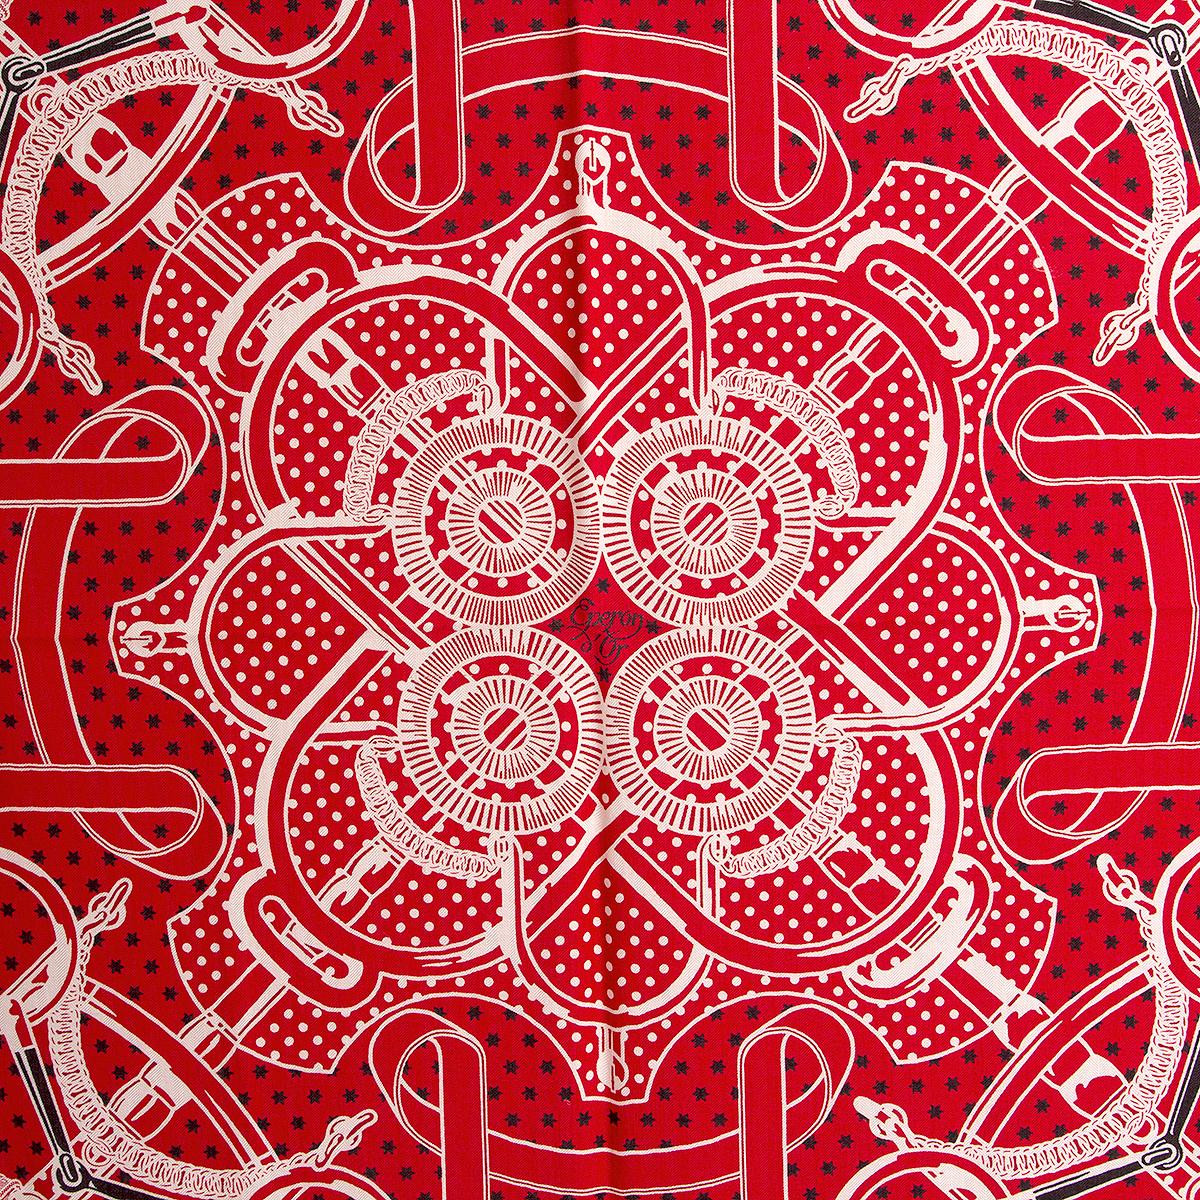 Hermes 'Eperon d'Or 140' shawl by Henri d'Origny in red cashmere (70%) and silk (30%) with details in black and white. Brand new. No Box.

Width 140cm (54.6in)
Height 140cm (54.6in)